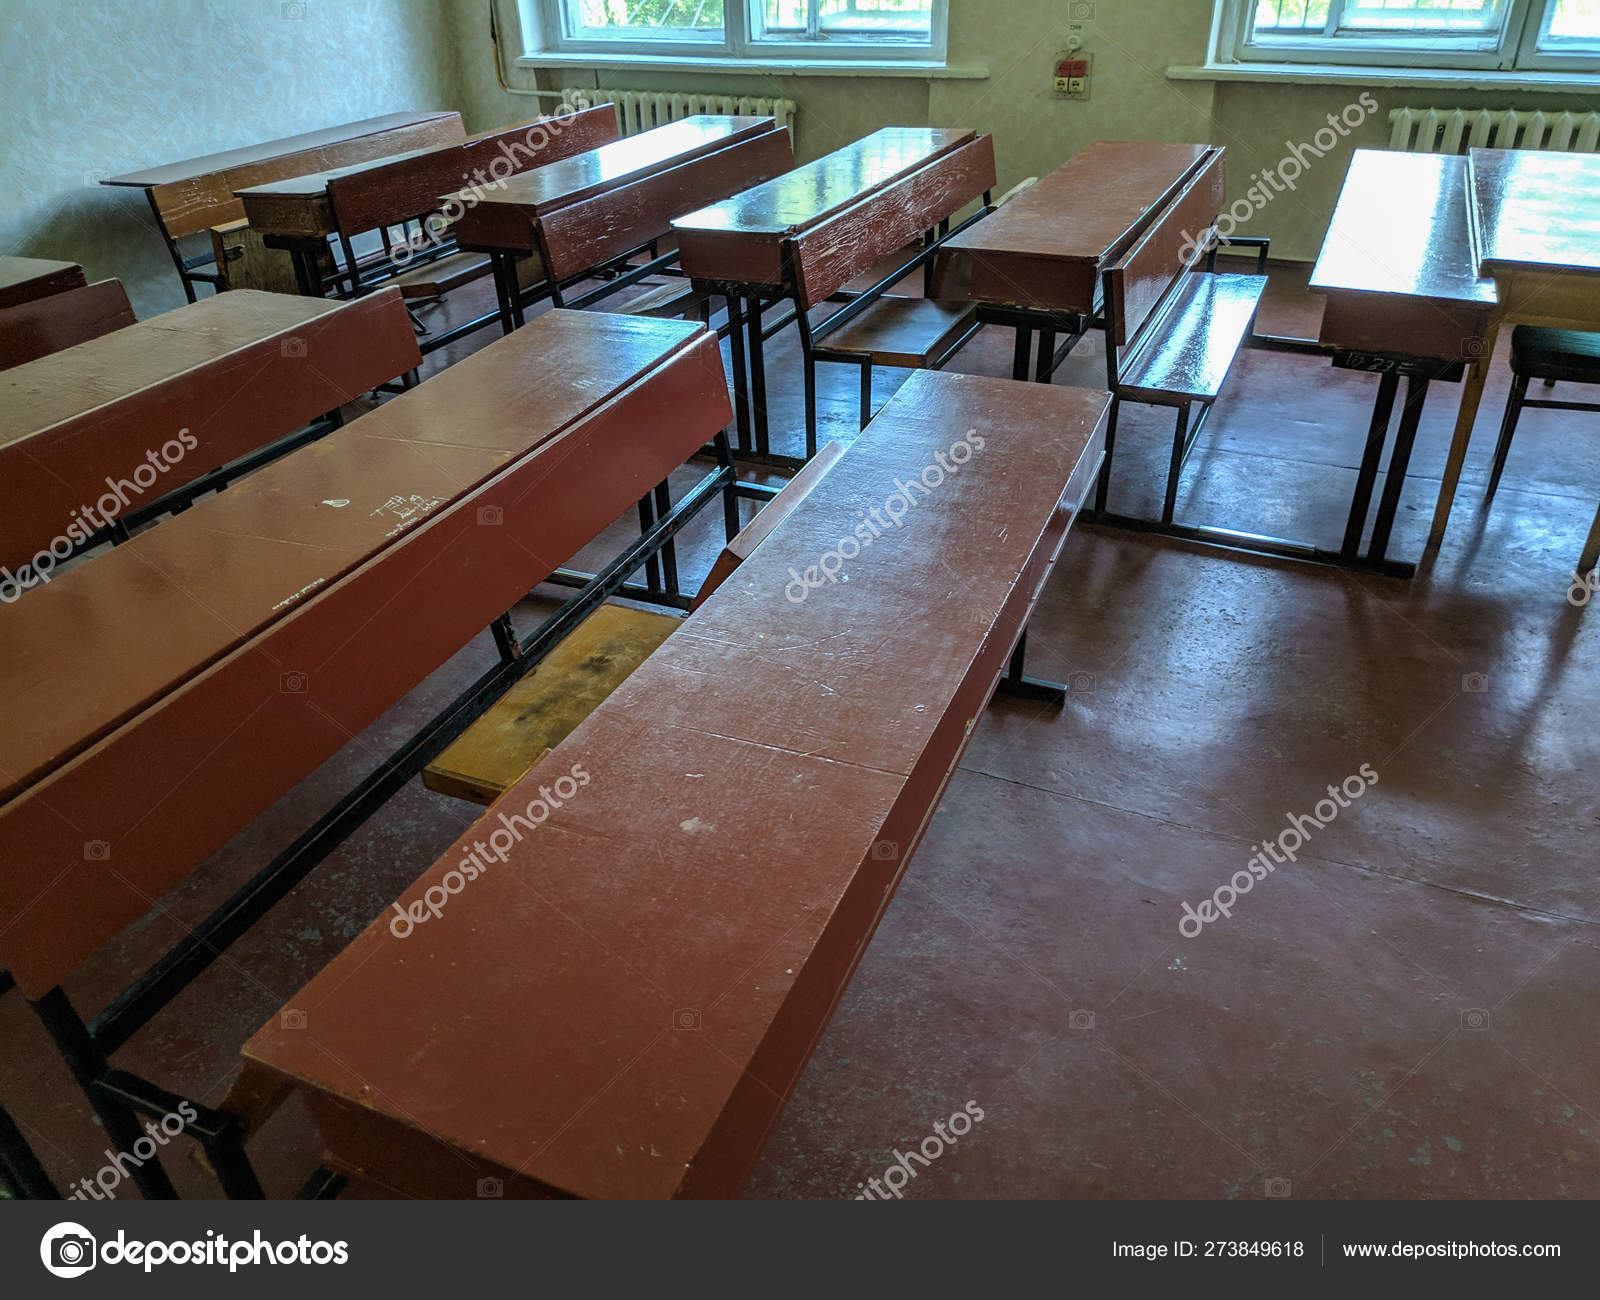 Vintage Tables Chairs Old Classroom Lecture Hall Student Audience